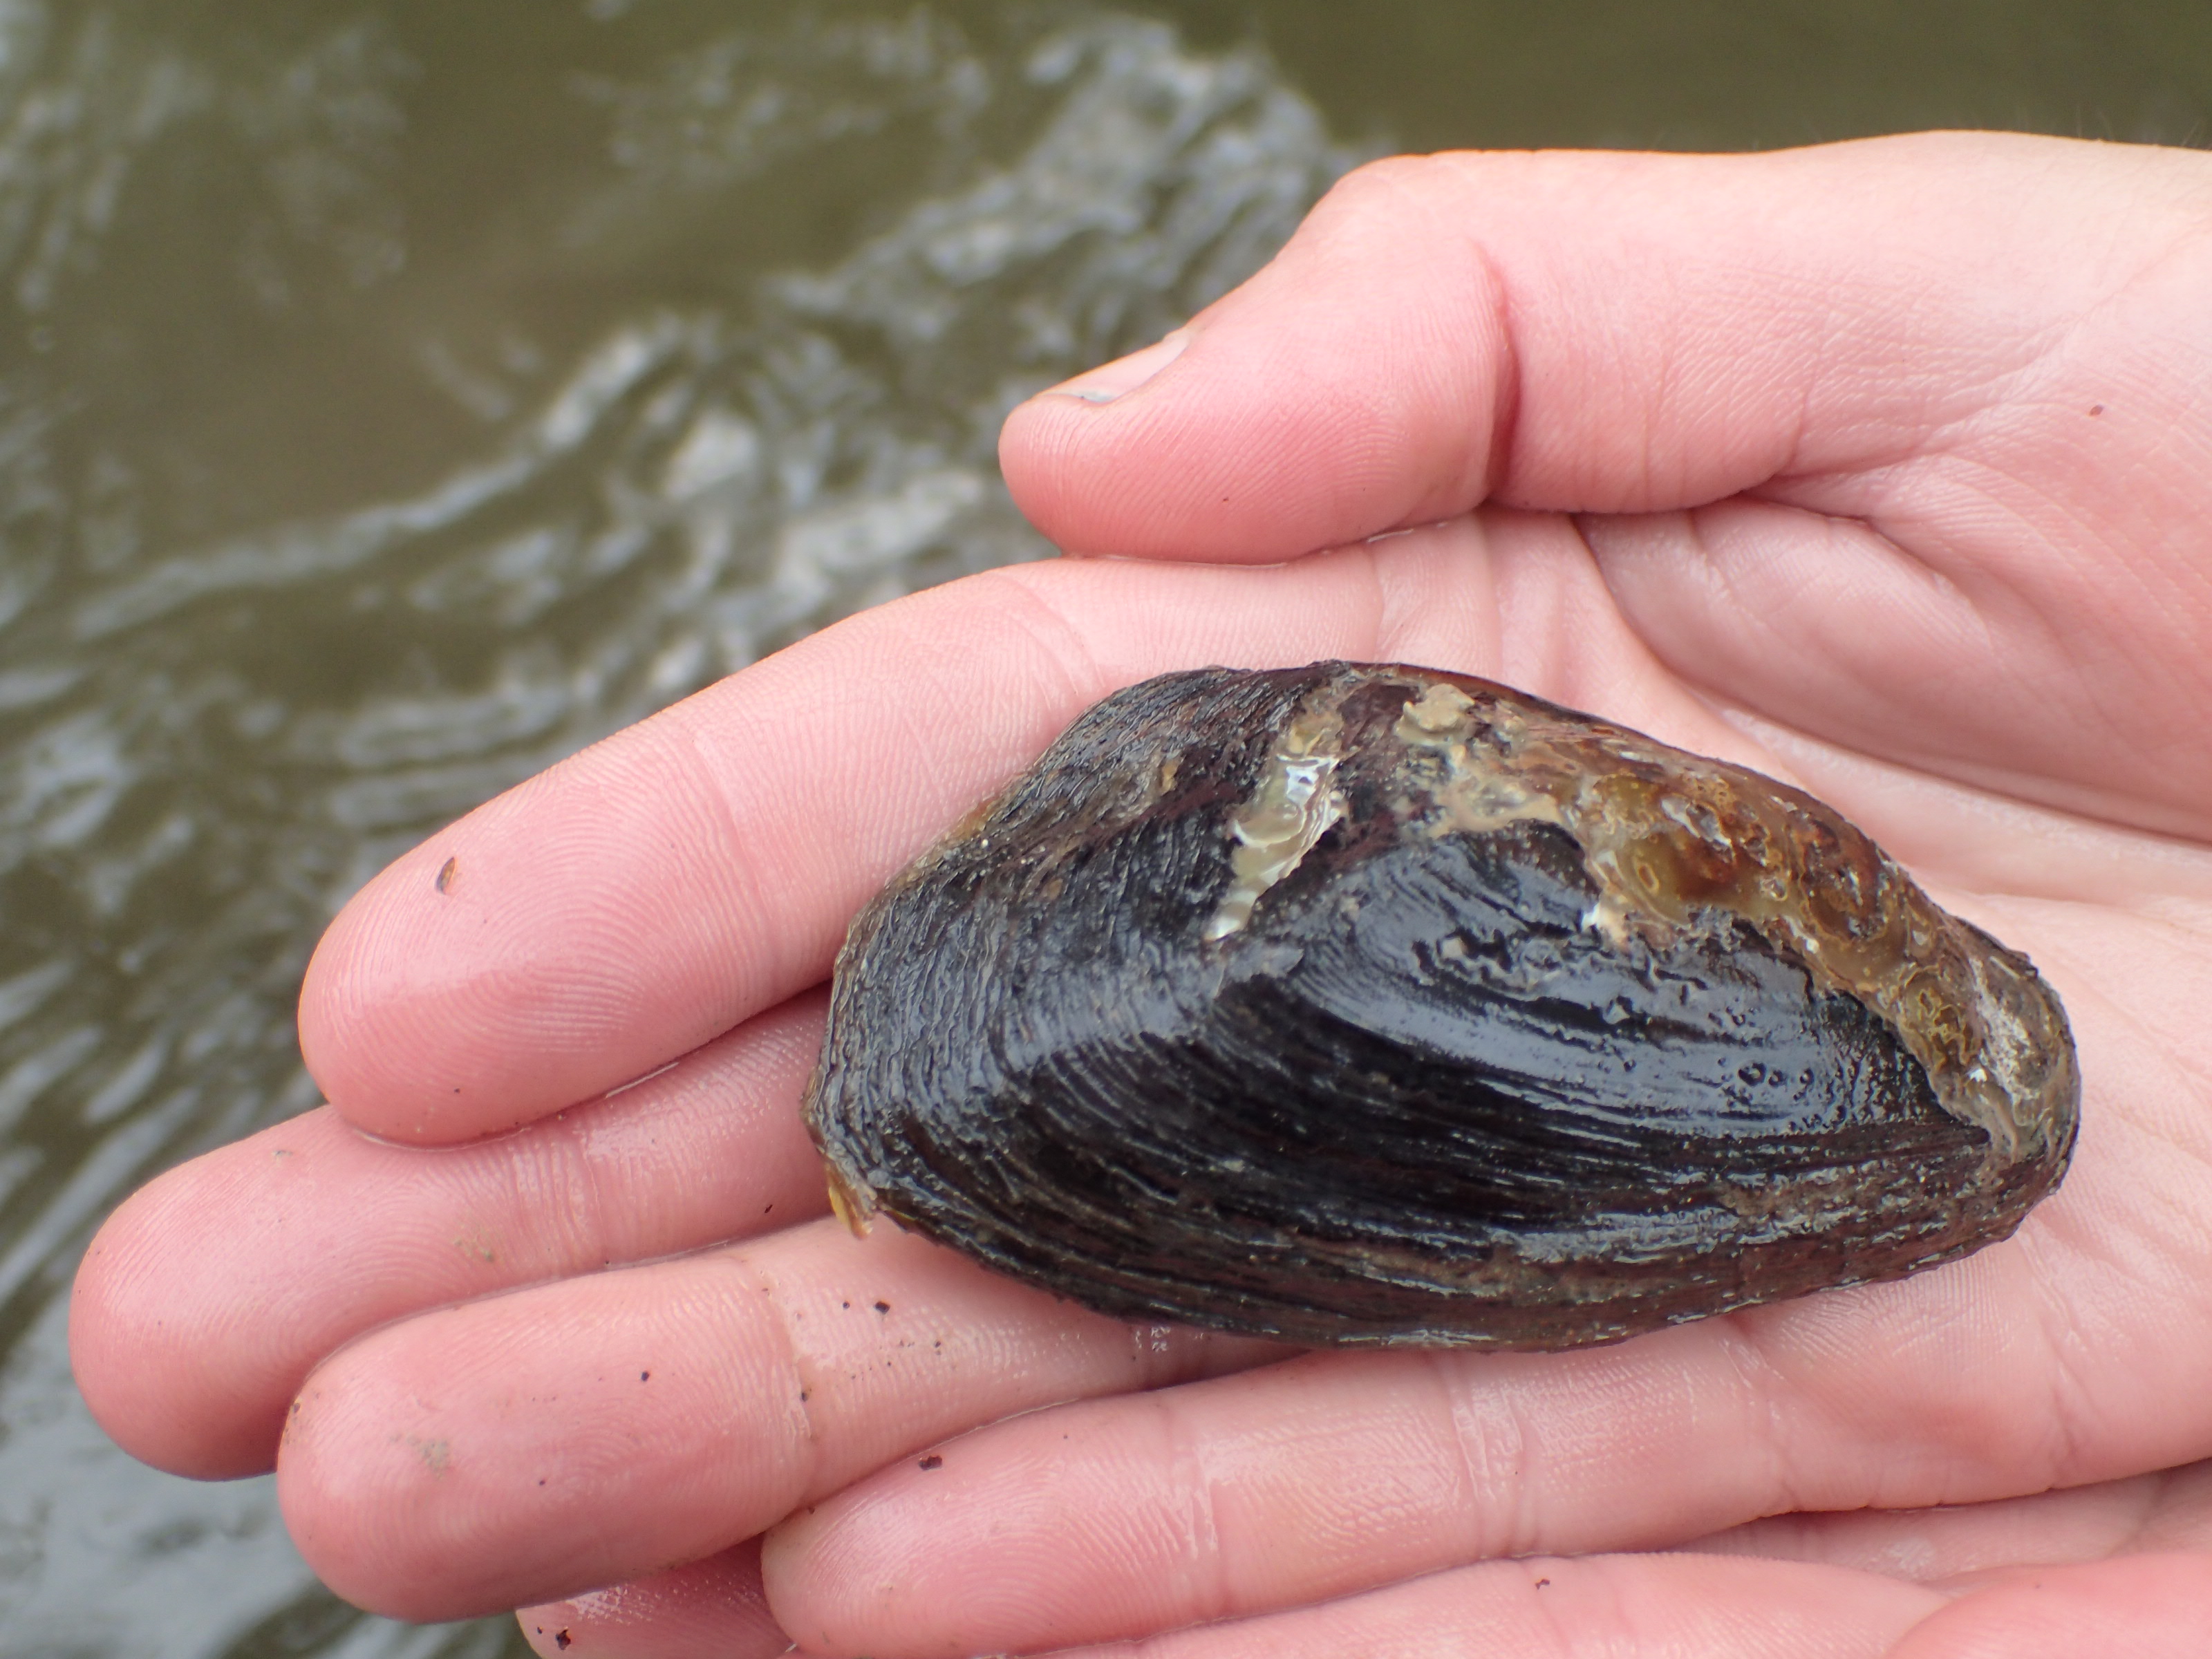 A close up of a biologist's hand carefully cradling a the brown shell of a living western ridged mussel.